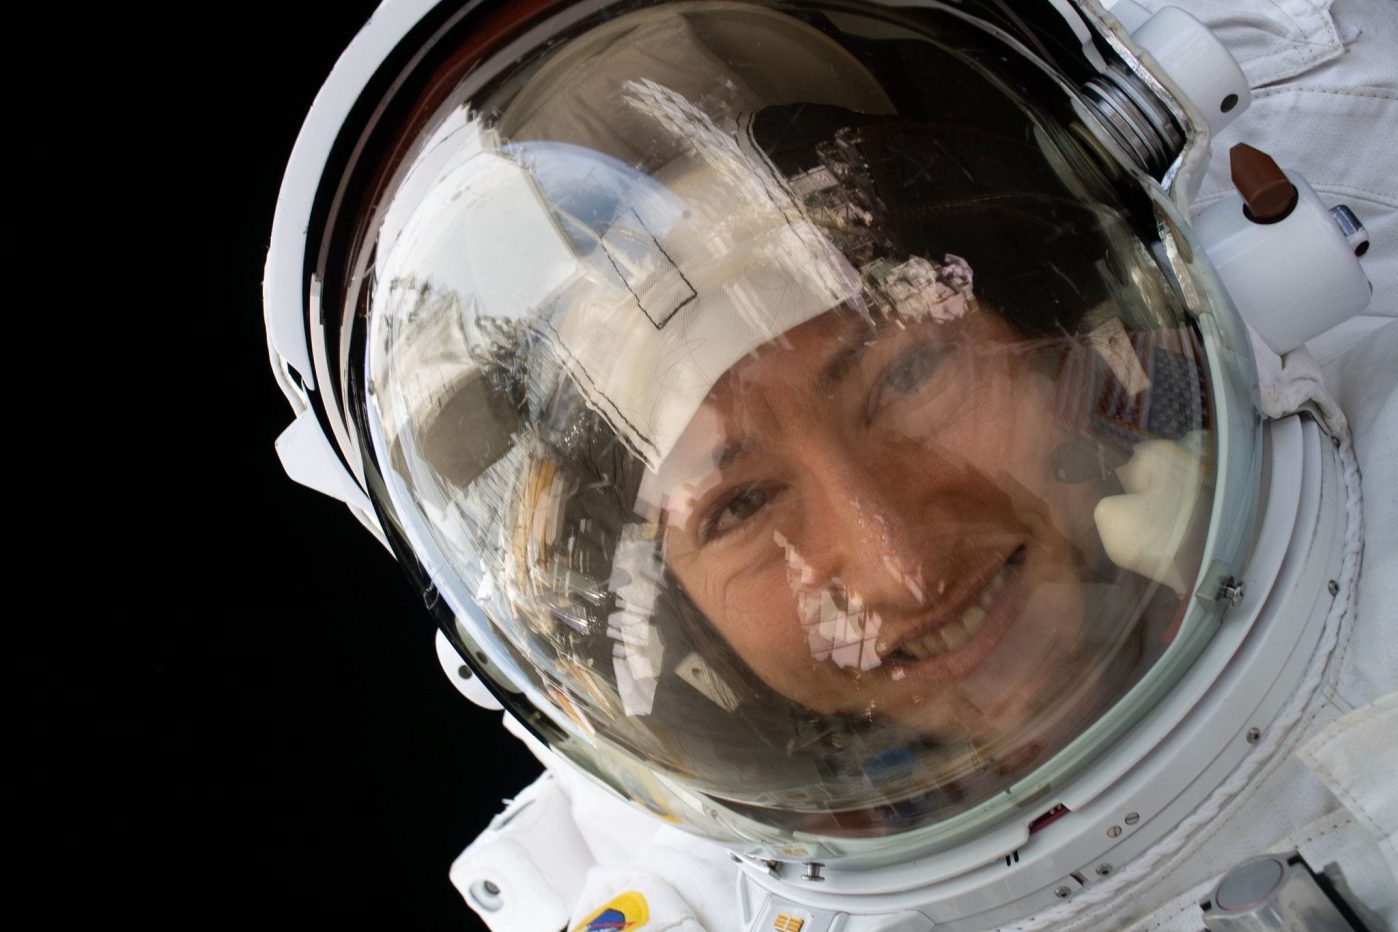 Space: NASA astronaut sets new record